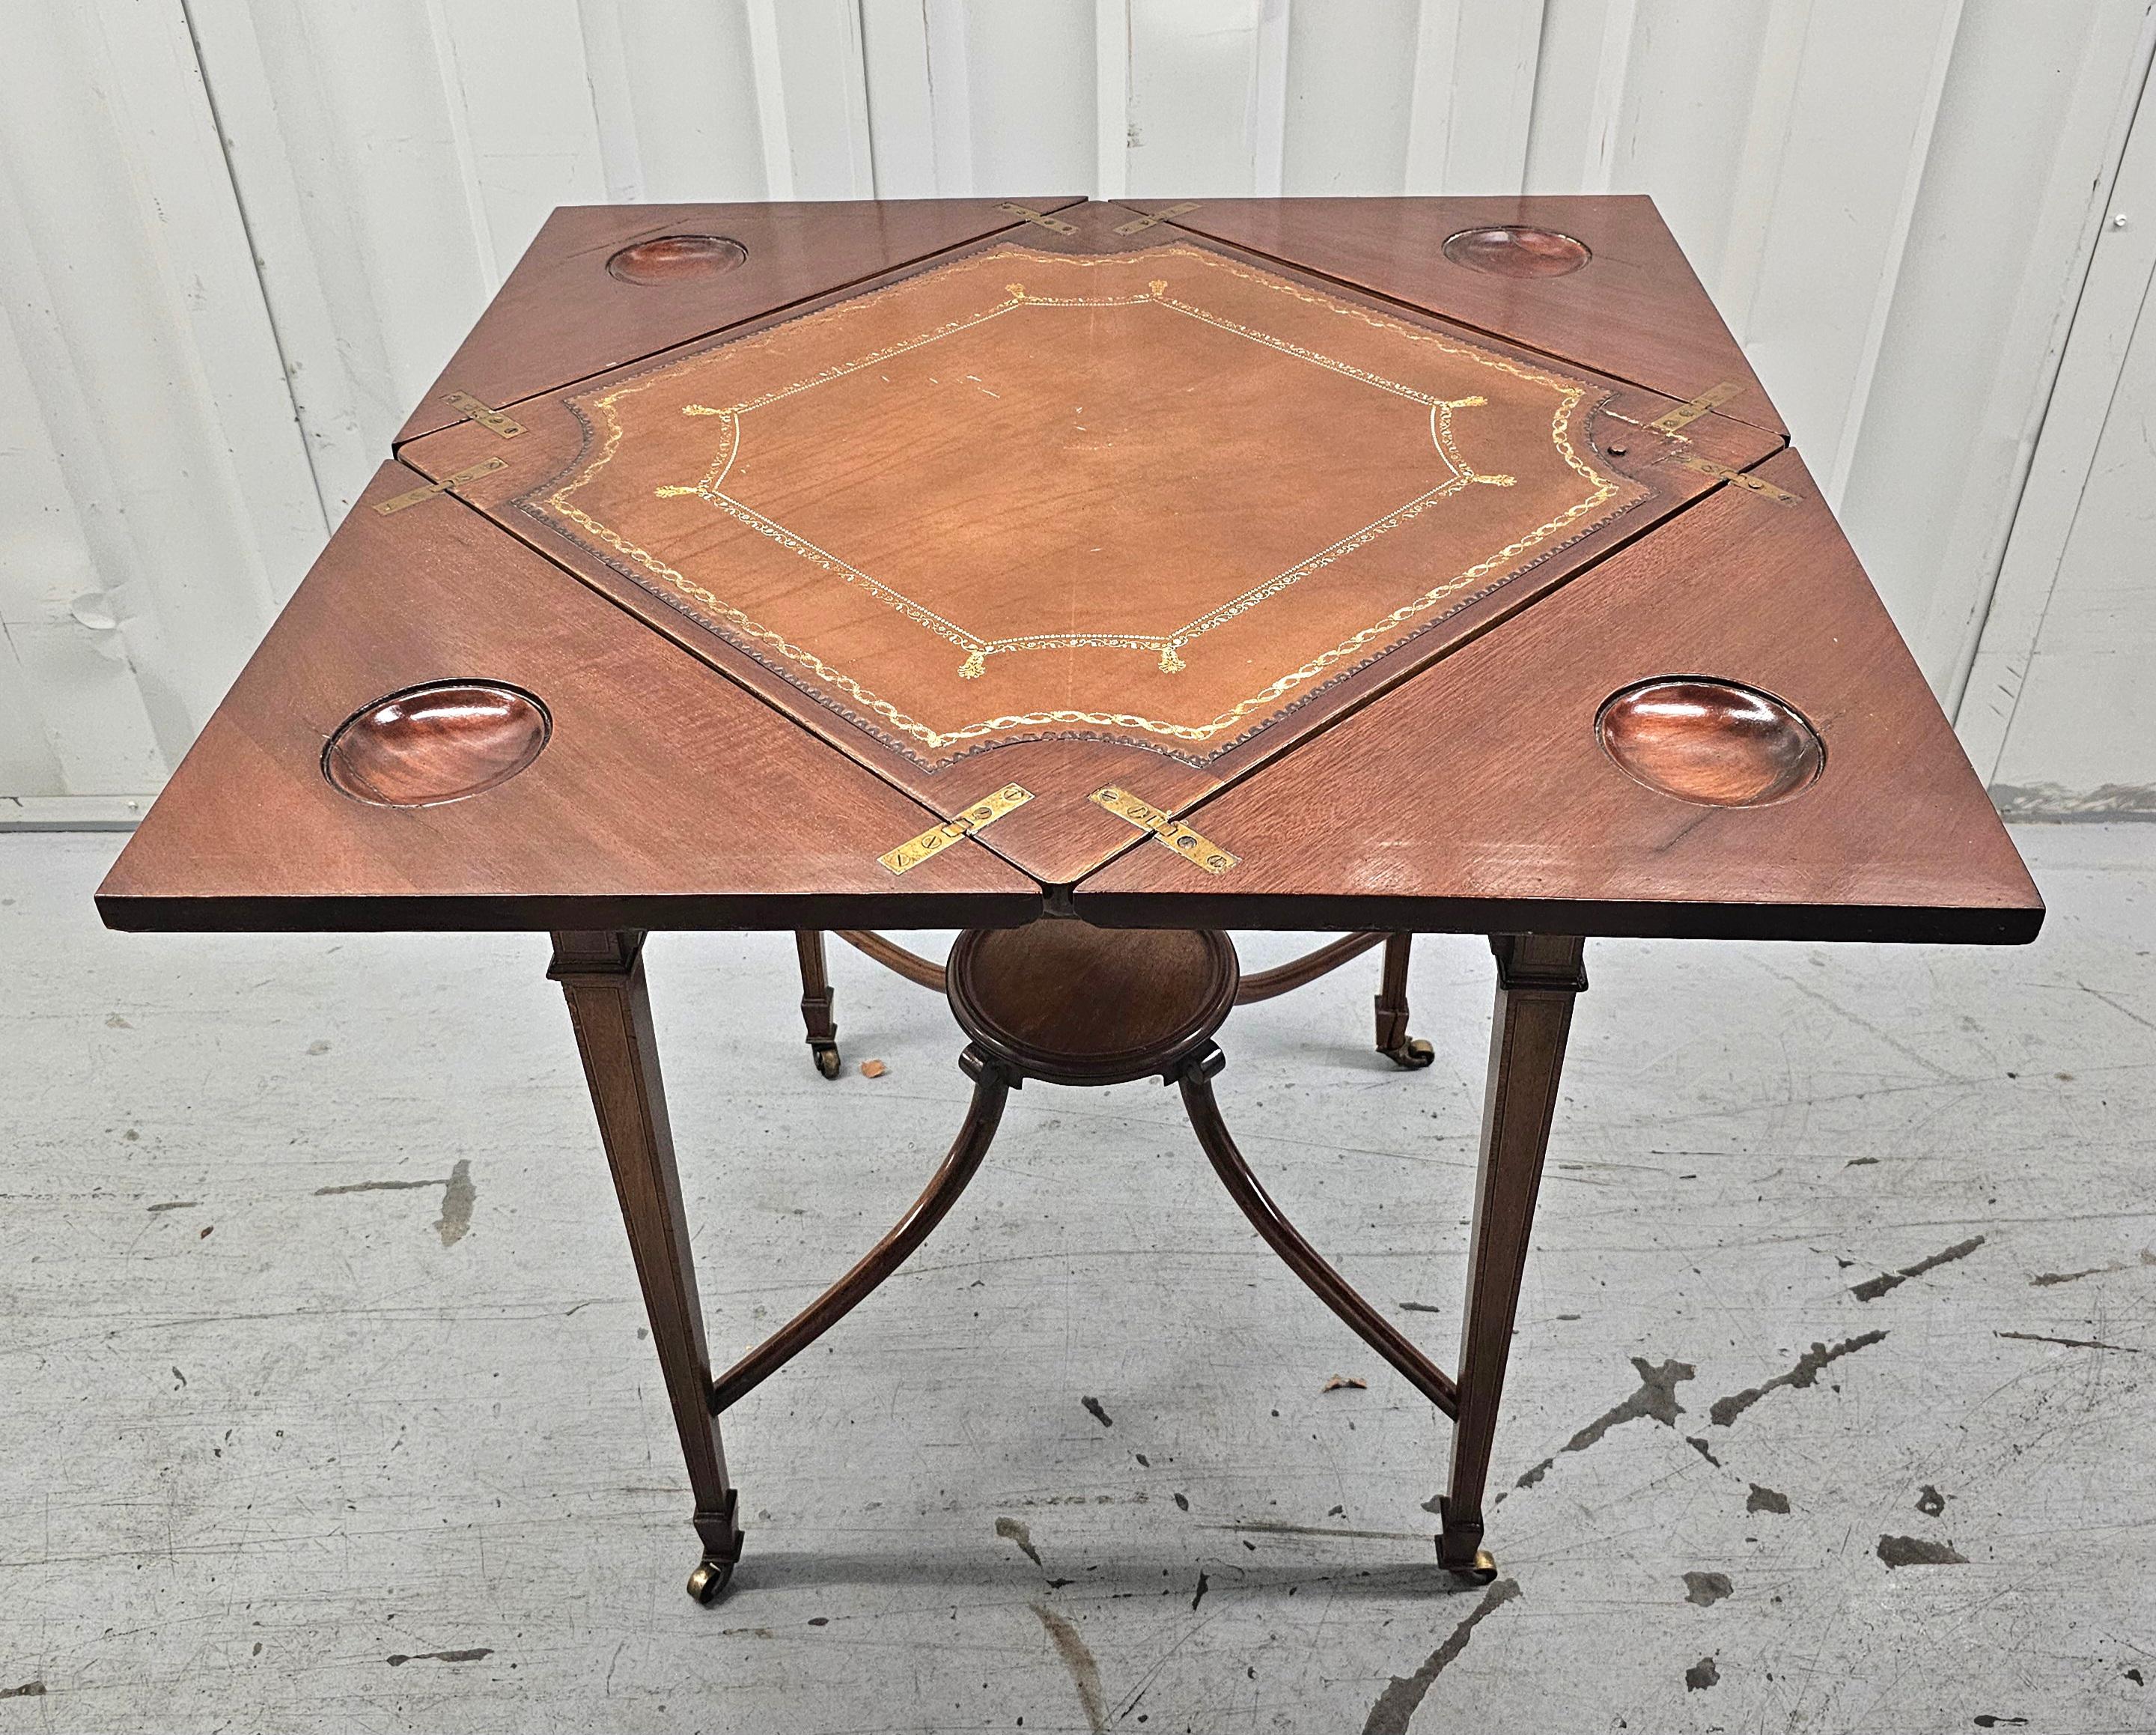 19th Century 19th C. Edwardian Mahogany Inlaid Marquetry Handkerchief Fold-Top Games Table For Sale